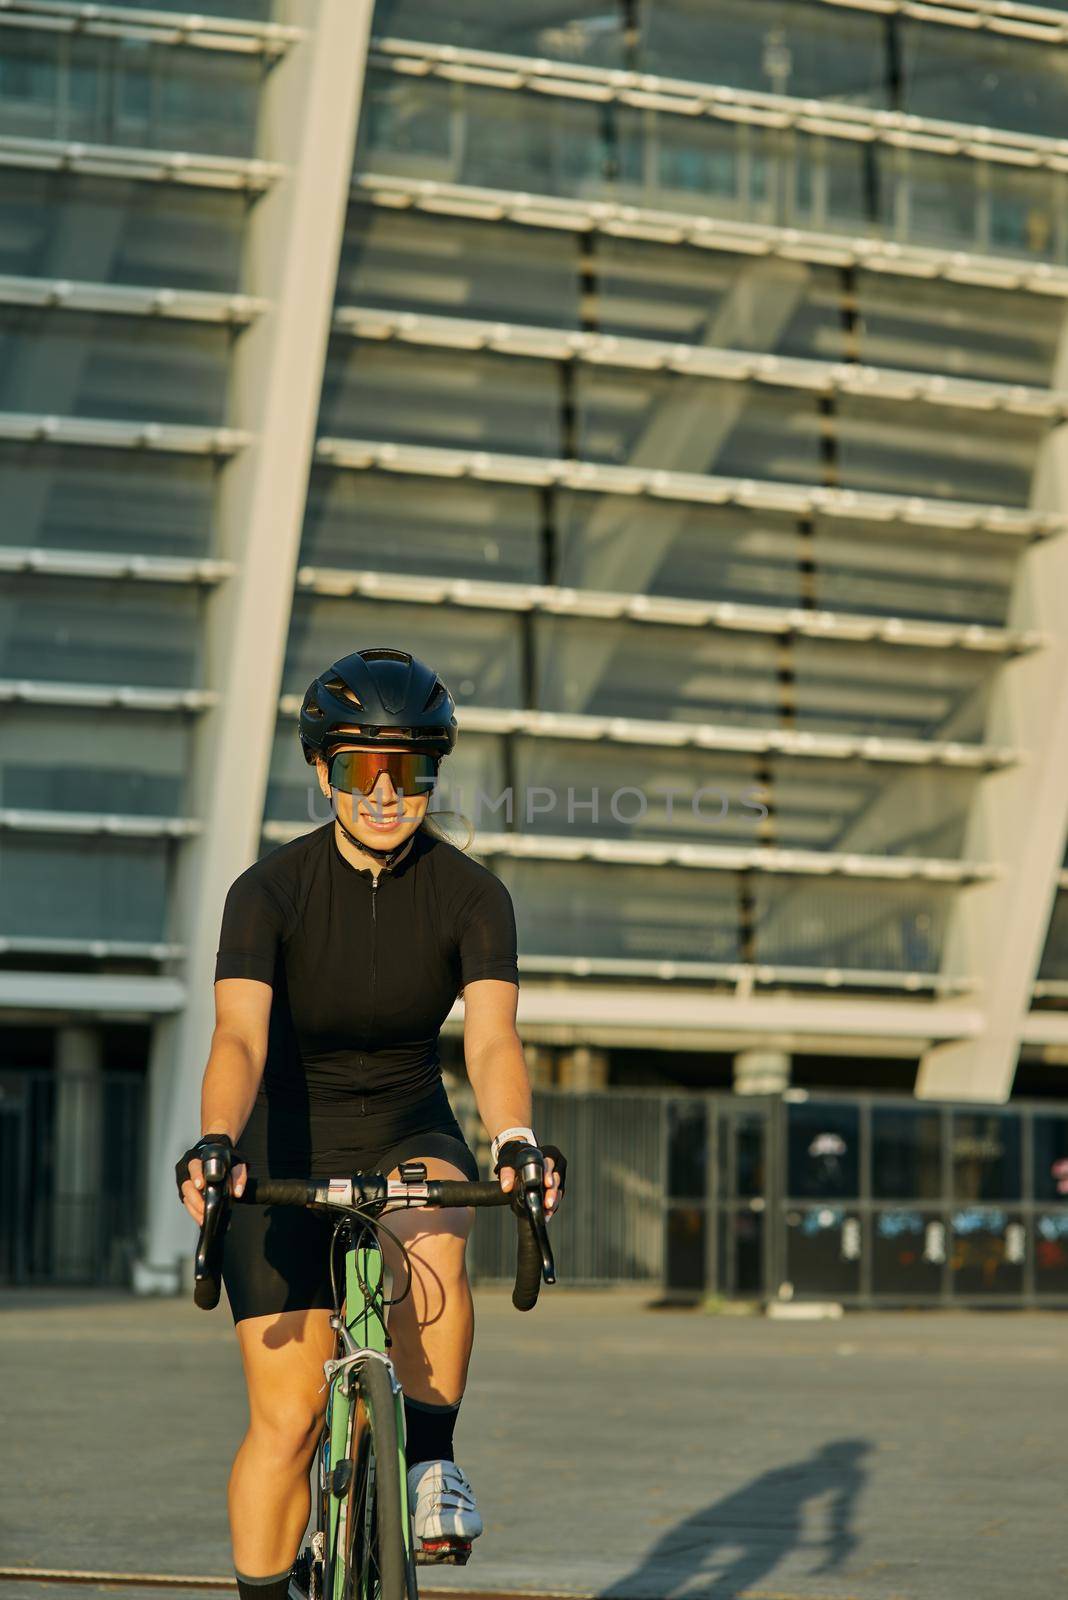 Excited professional female cyclist in black cycling garment and protective gear smiling while riding bicycle in city, training outdoors at sunset by friendsstock